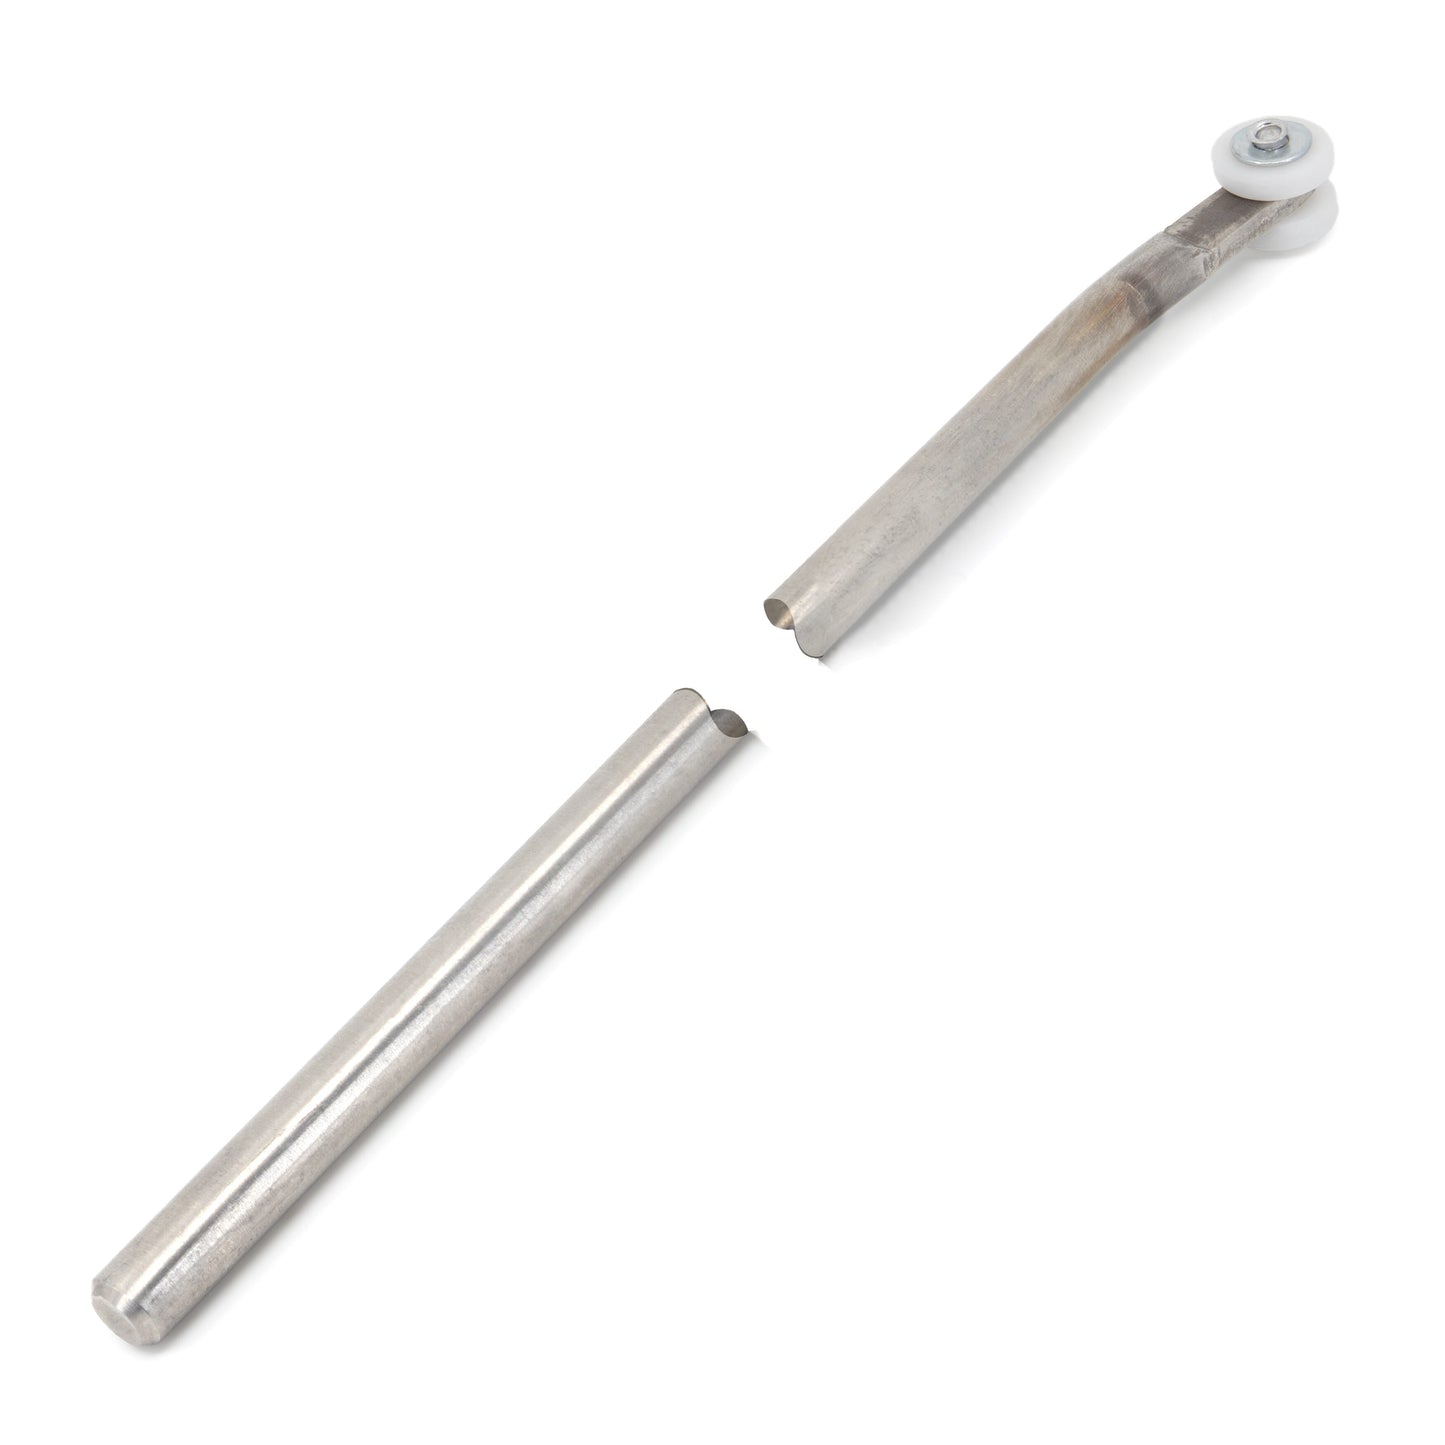 Locking Rod with Roller - Stainless Steel